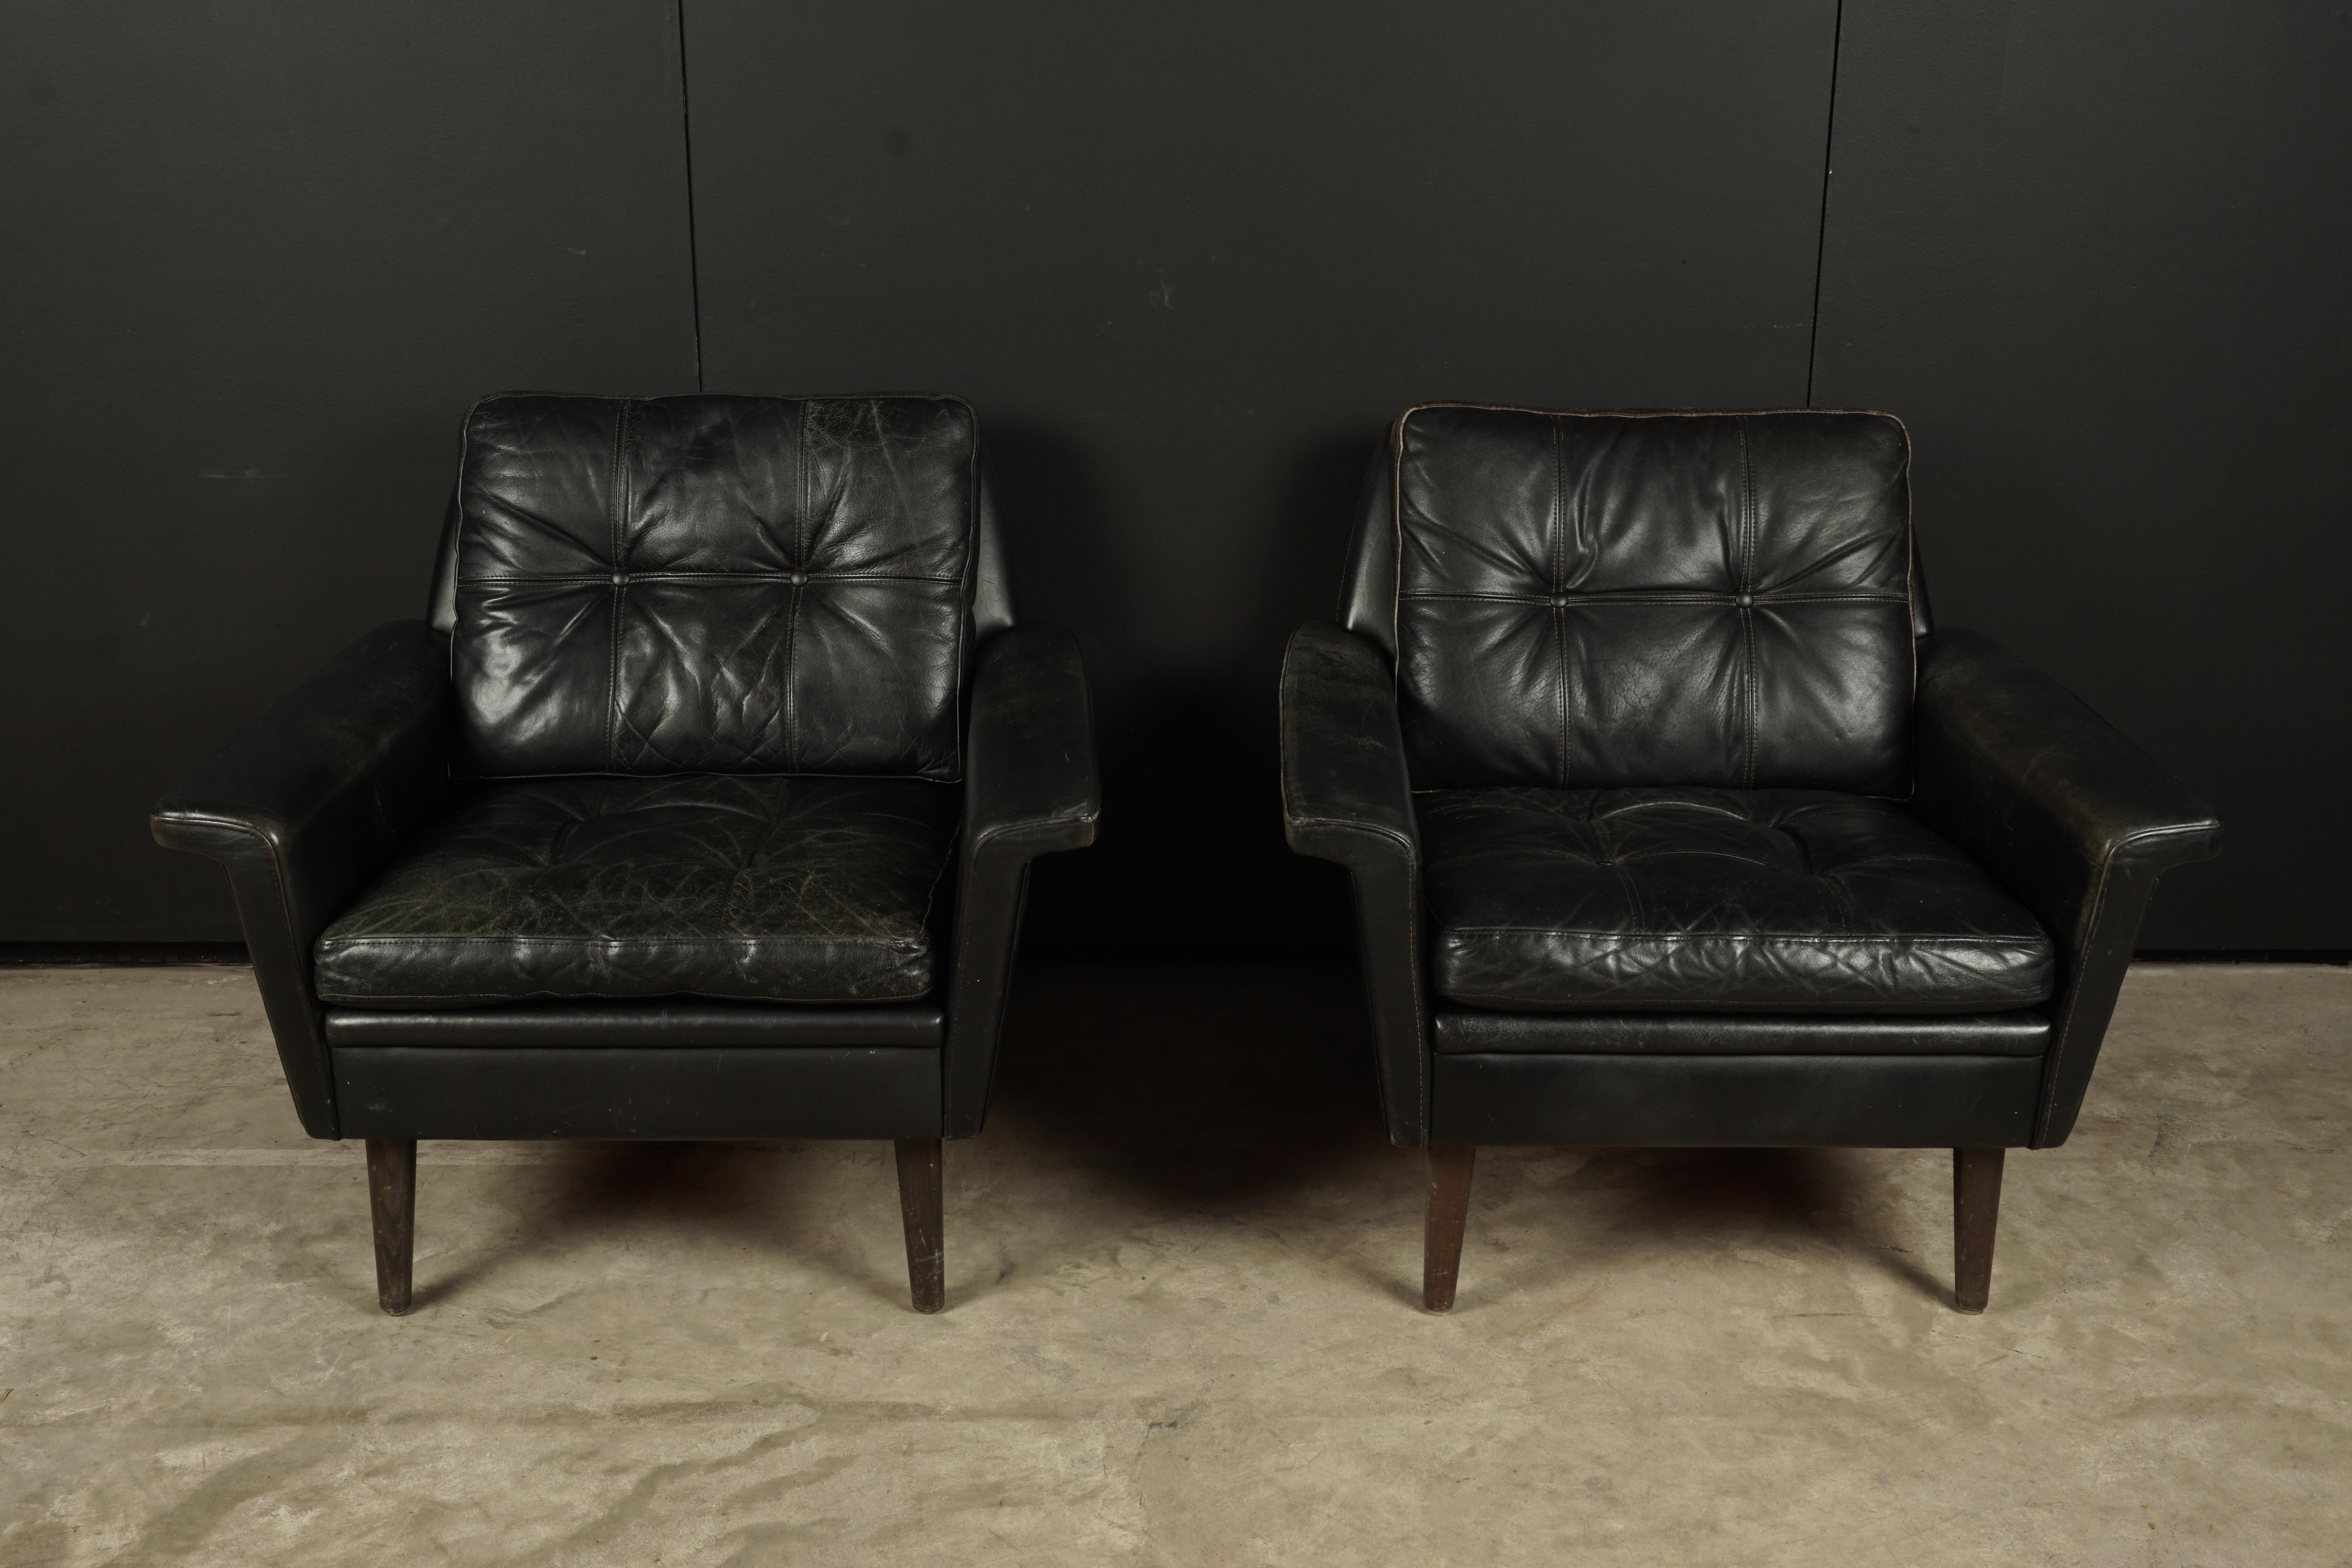 Vintage pair of leather lounge chairs from Denmark, circa 1970. Original black leather upholstery with light patina and wear.